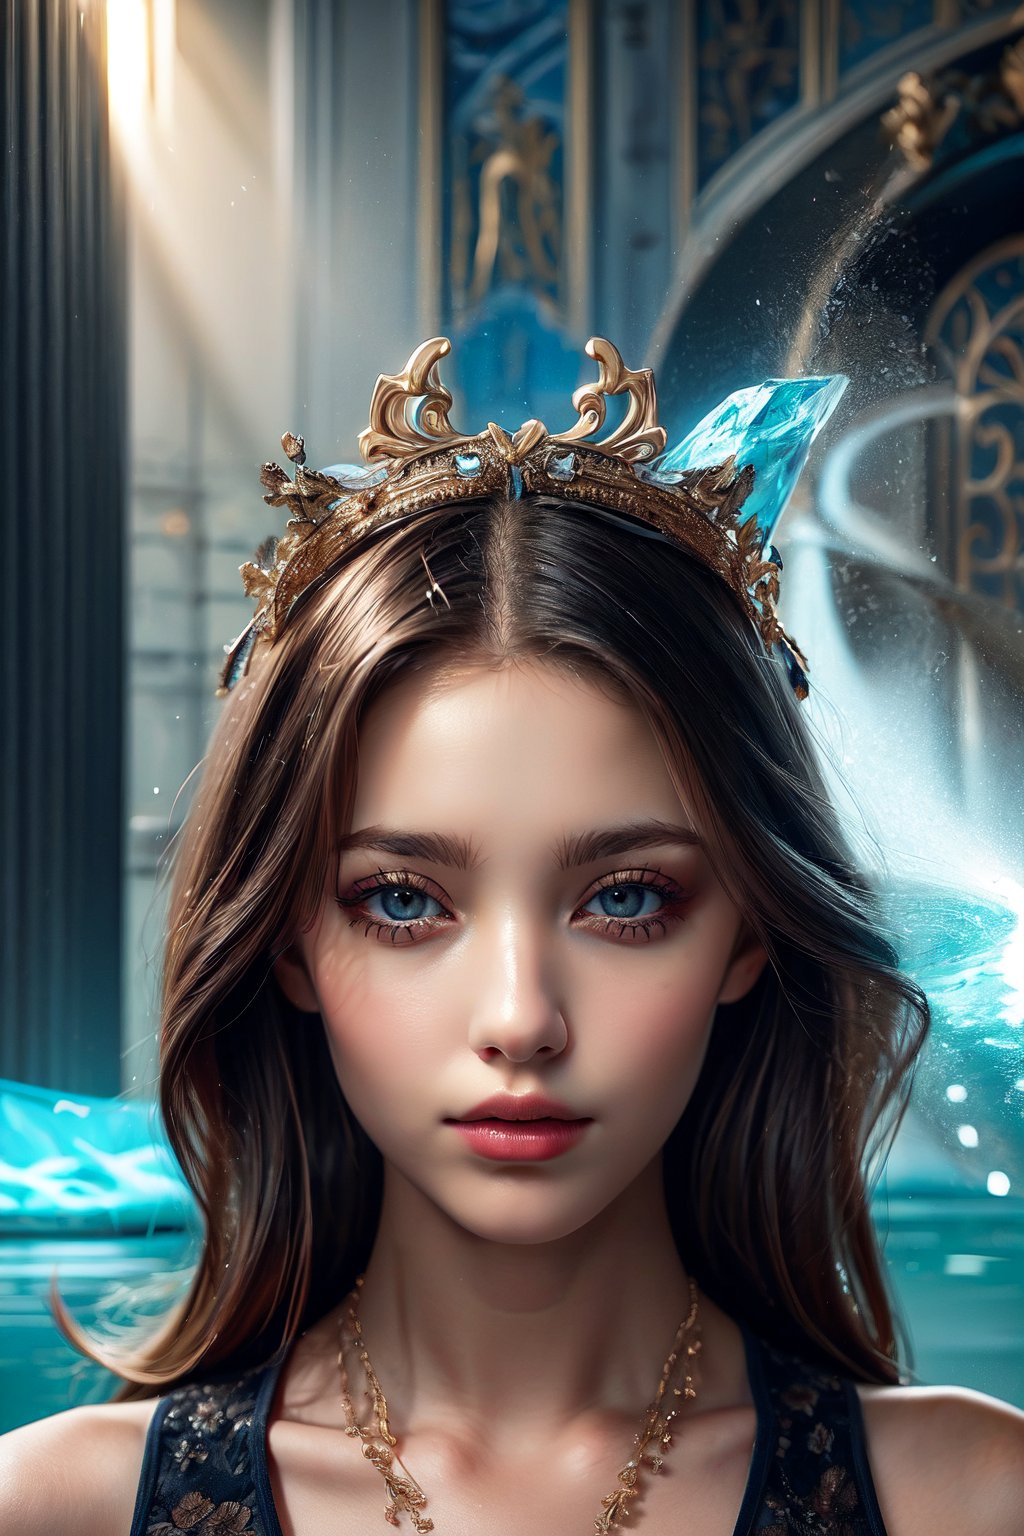 (masterpiece, high quality:1.5), 8K, HDR, 
1girl, well_defined_face, well_defined_eyes, ultra_detailed_eyes, ultra_detailed_face, by FuturEvoLab, 
ethereal lighting, immortal, elegant, porcelain skin, jet-black hair, waves, pale face, ice-blue eyes, blood-red lips, pinhole photograph, retro aesthetic, monochromatic backdrop, mysterious, enigmatic, timeless allure, the siren of the night, secrets, longing, hidden dangers, captivating, nostalgia, timeless fascination, Edge feathering and holy light, ,Exquisite face